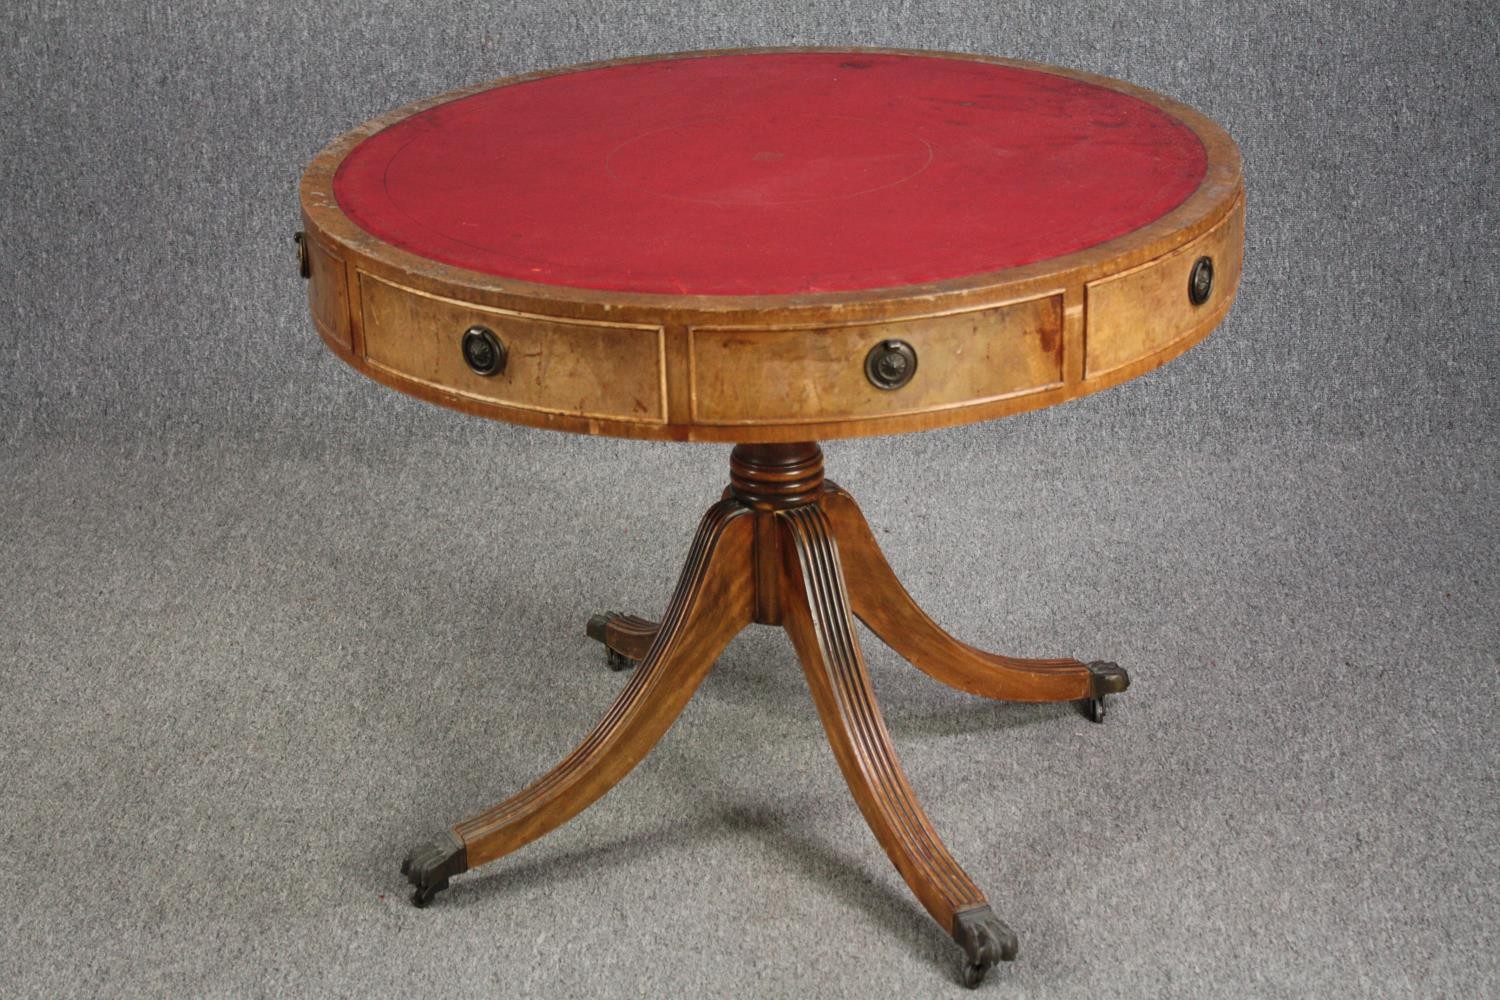 A Georgian style mahogany library drum table. H.72 Dia.92cm.